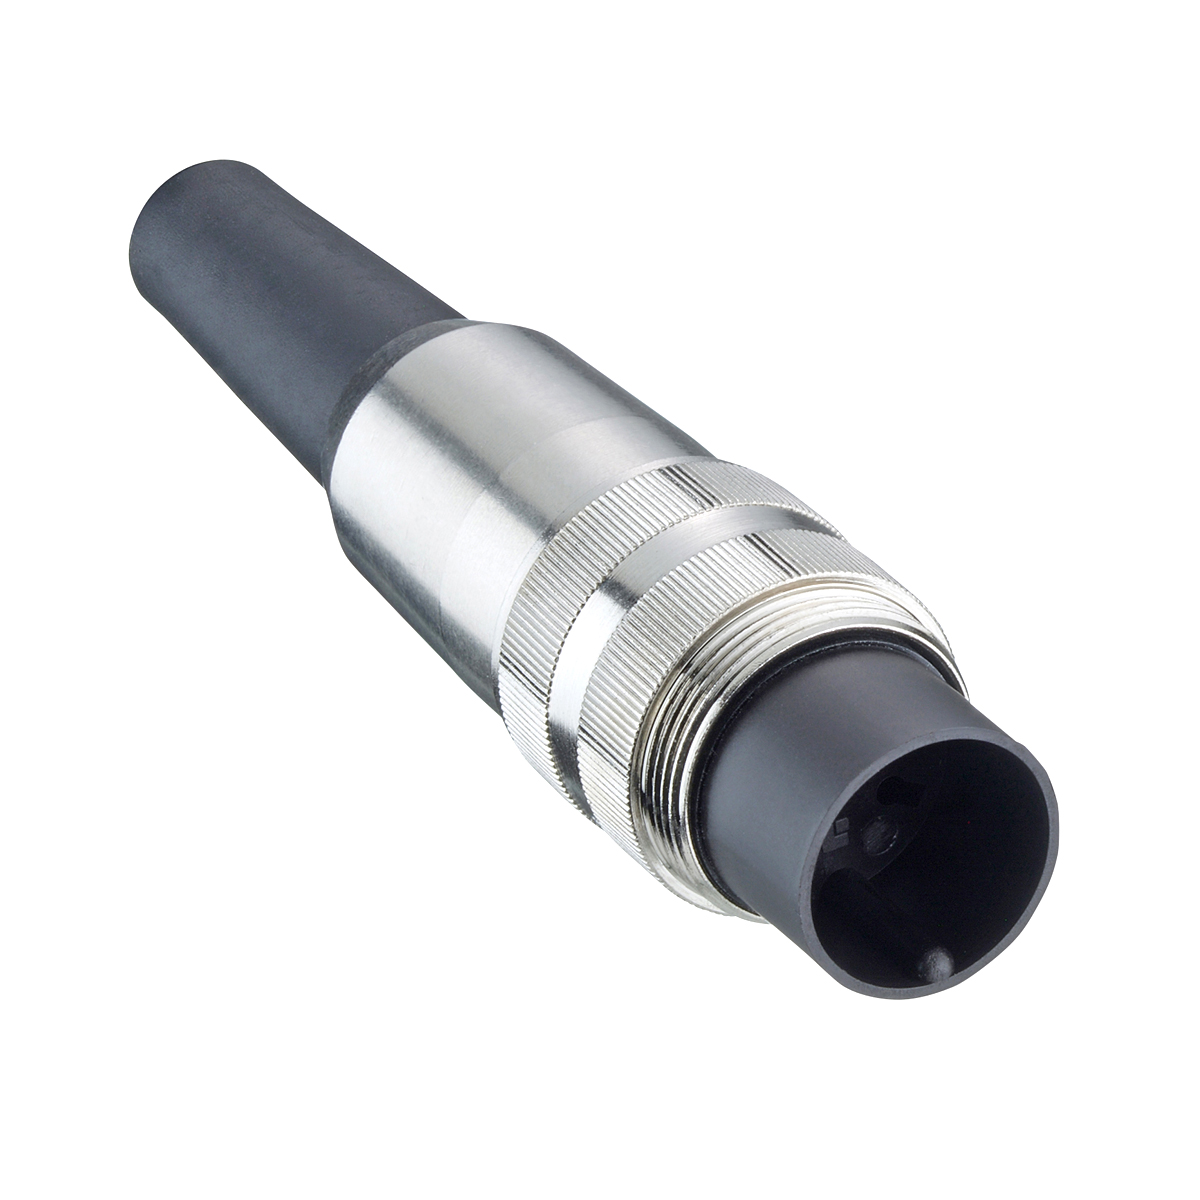 Lumberg: SV ... C (Series 03 | Circular connectors with threaded joint M16 acc. to IEC 61076-2-106, IP40/IP68)